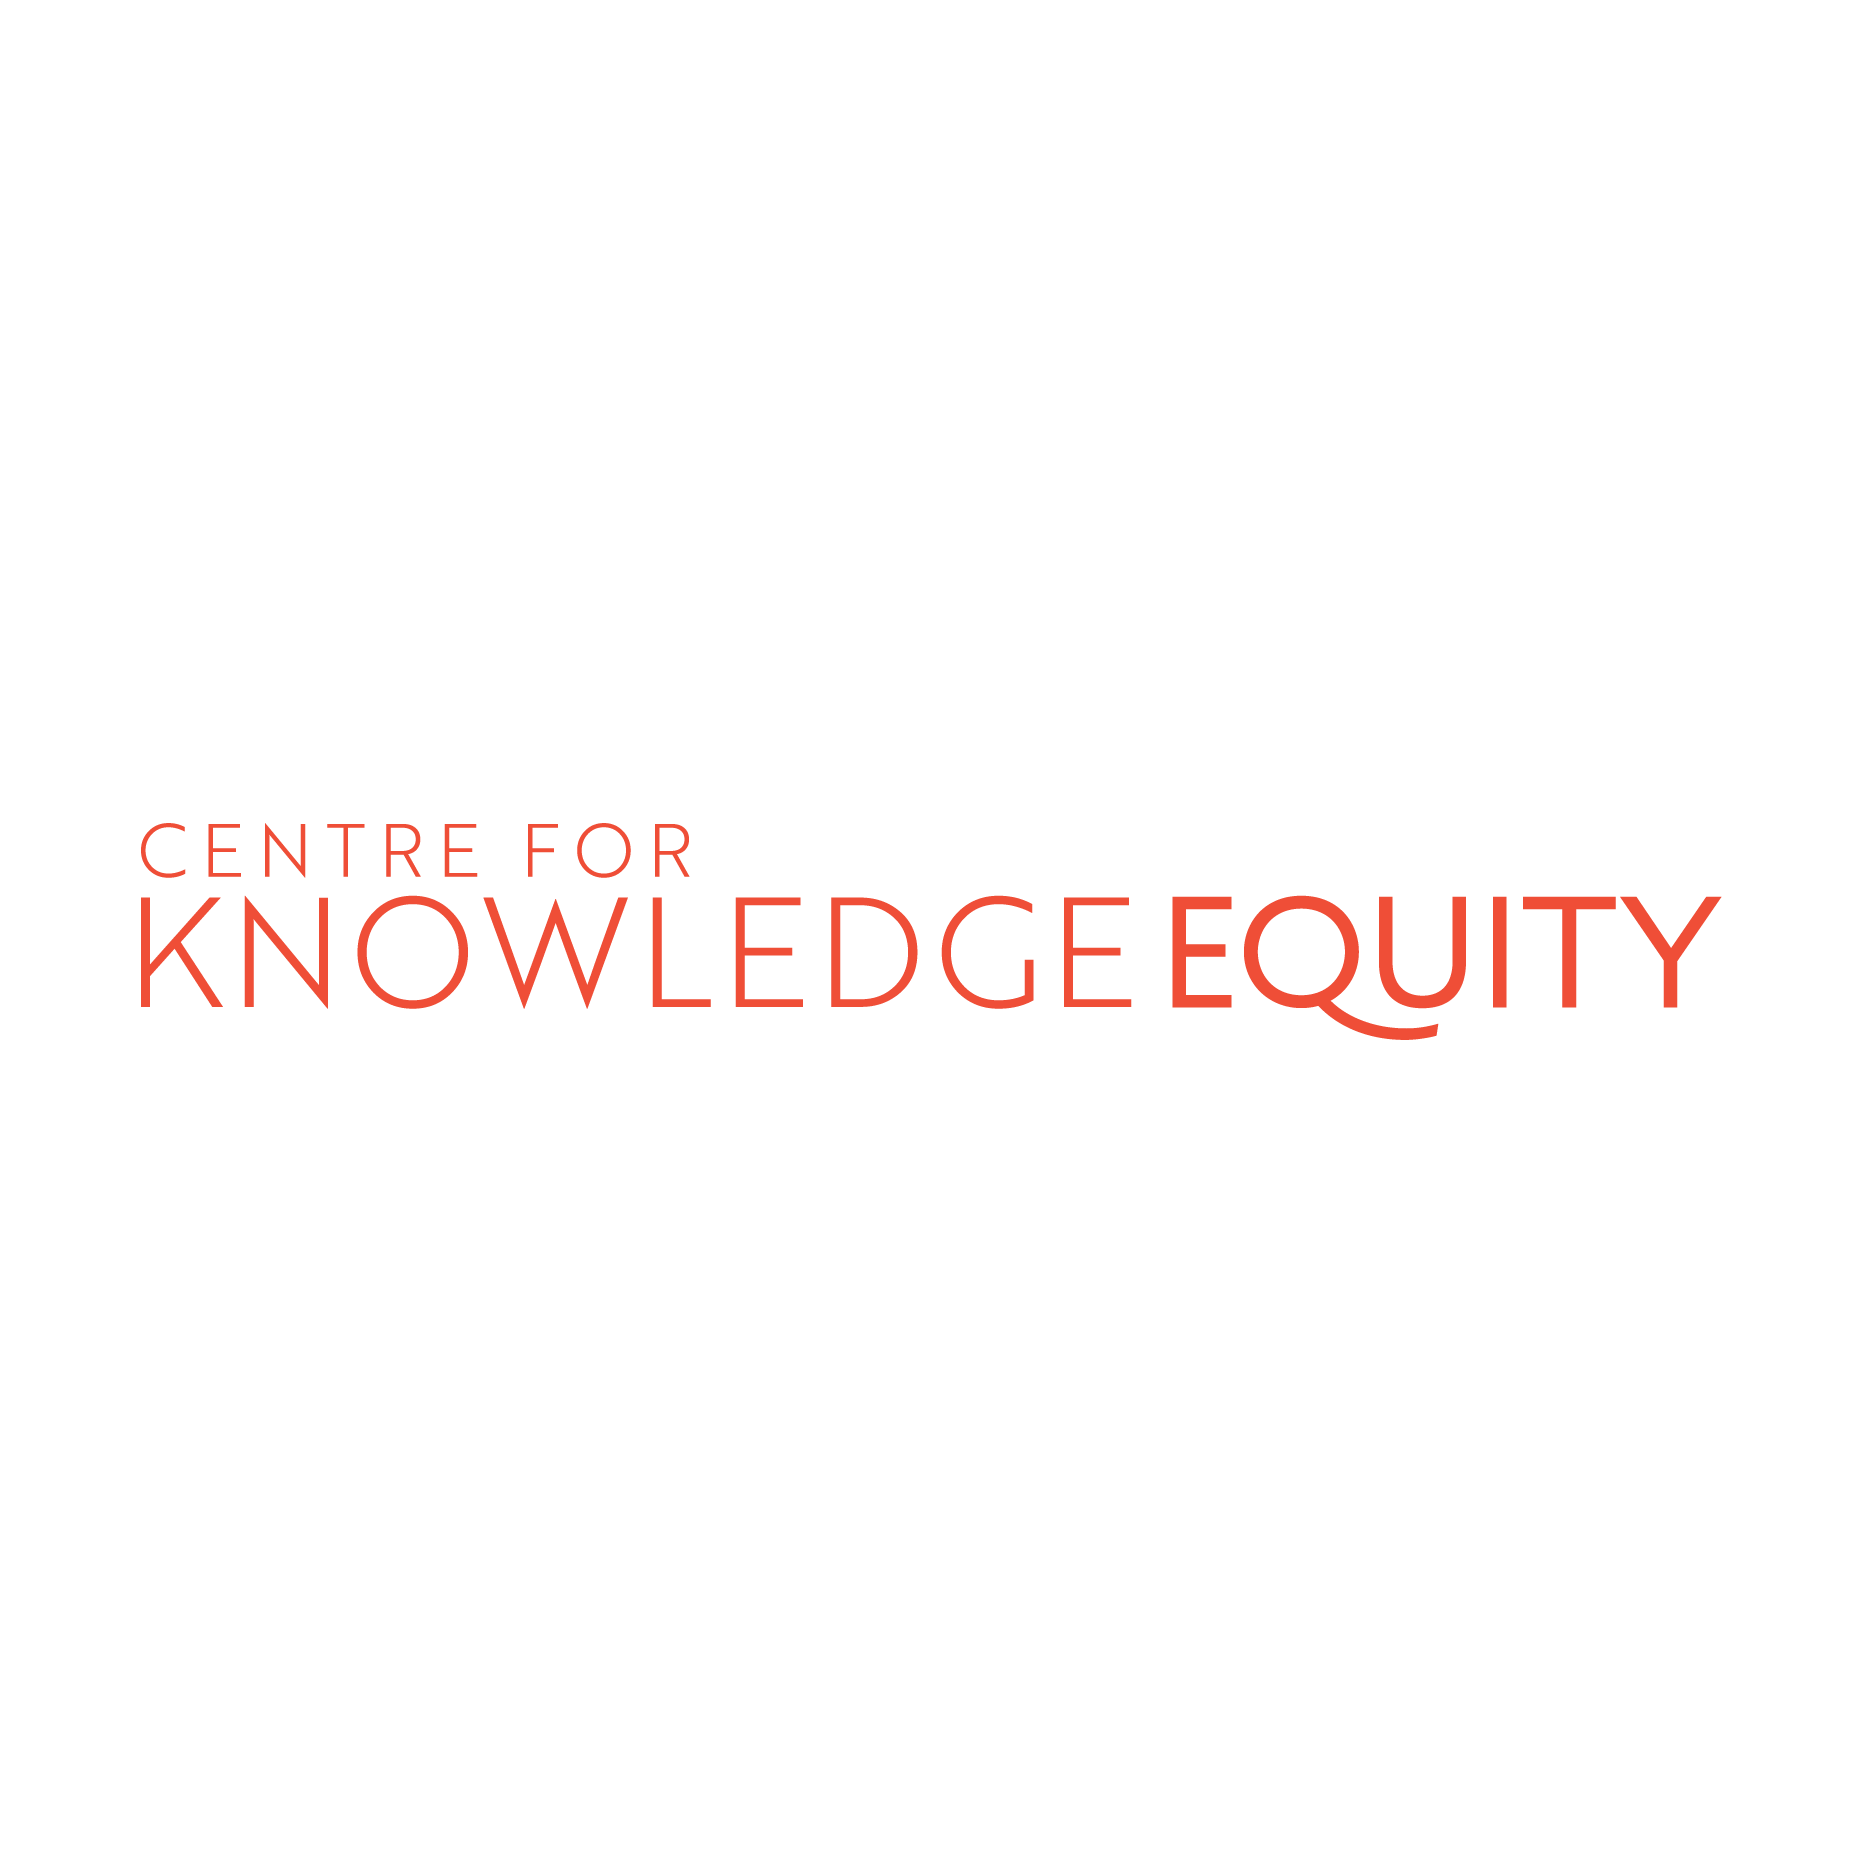 Centre for Knowledge Equity logo